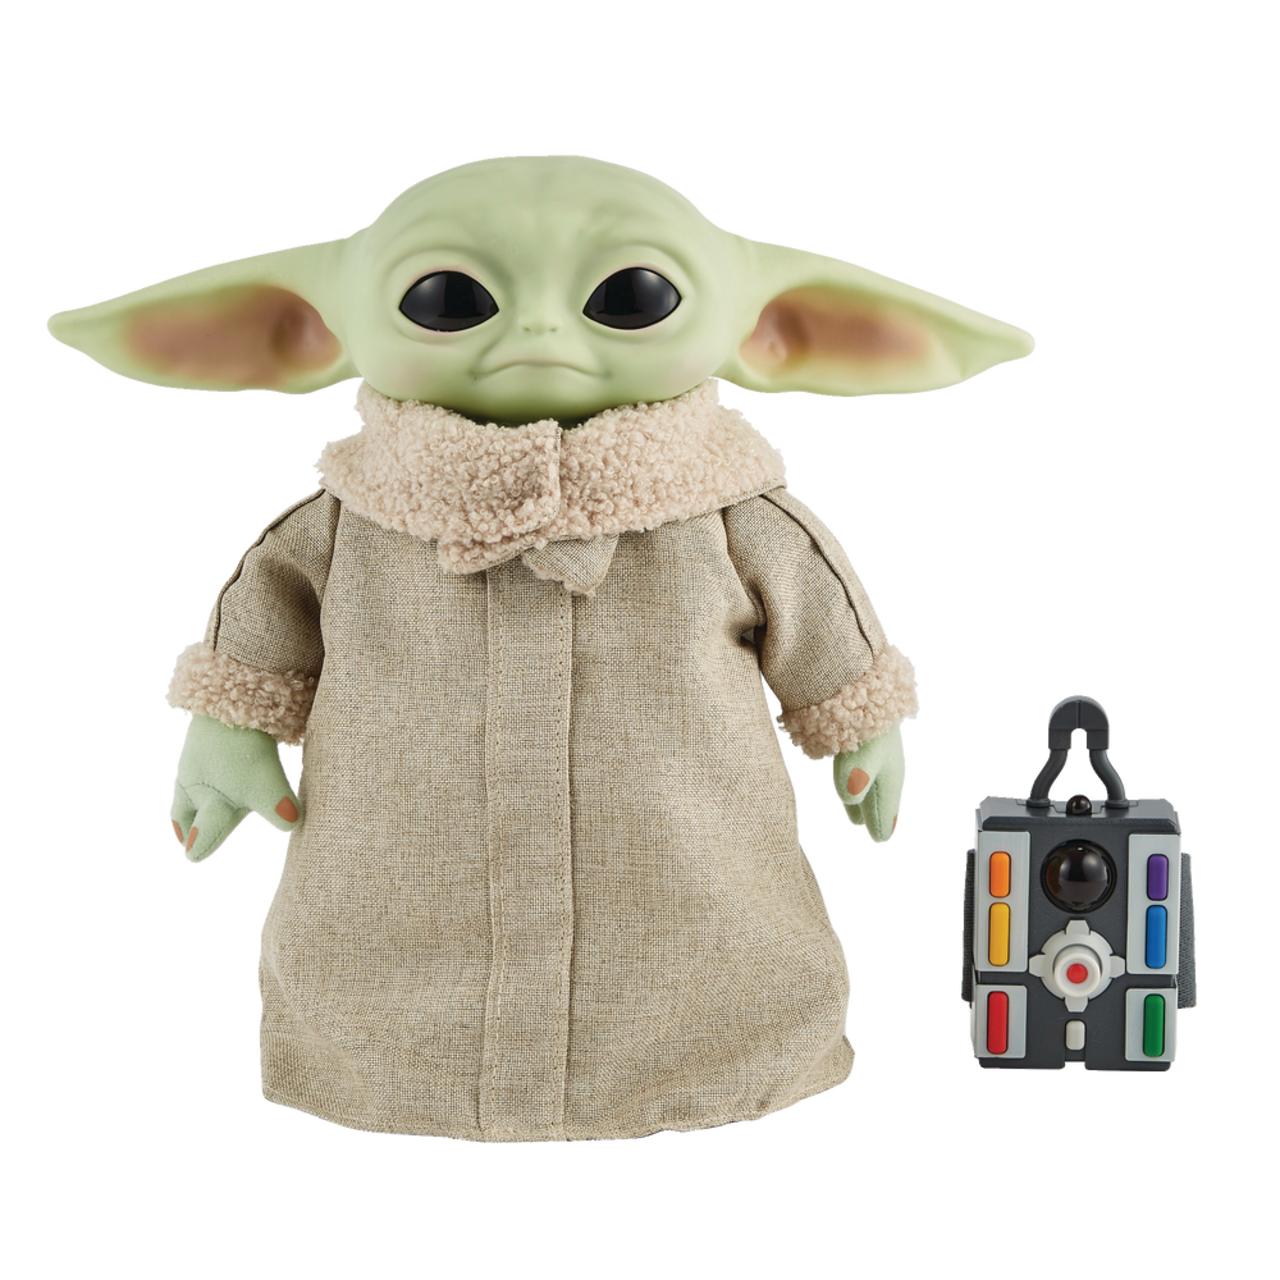 Star Wars: The Mandalorian Grogu, The Child, 12-in Plush Motion R/C Toy,  Age 3+